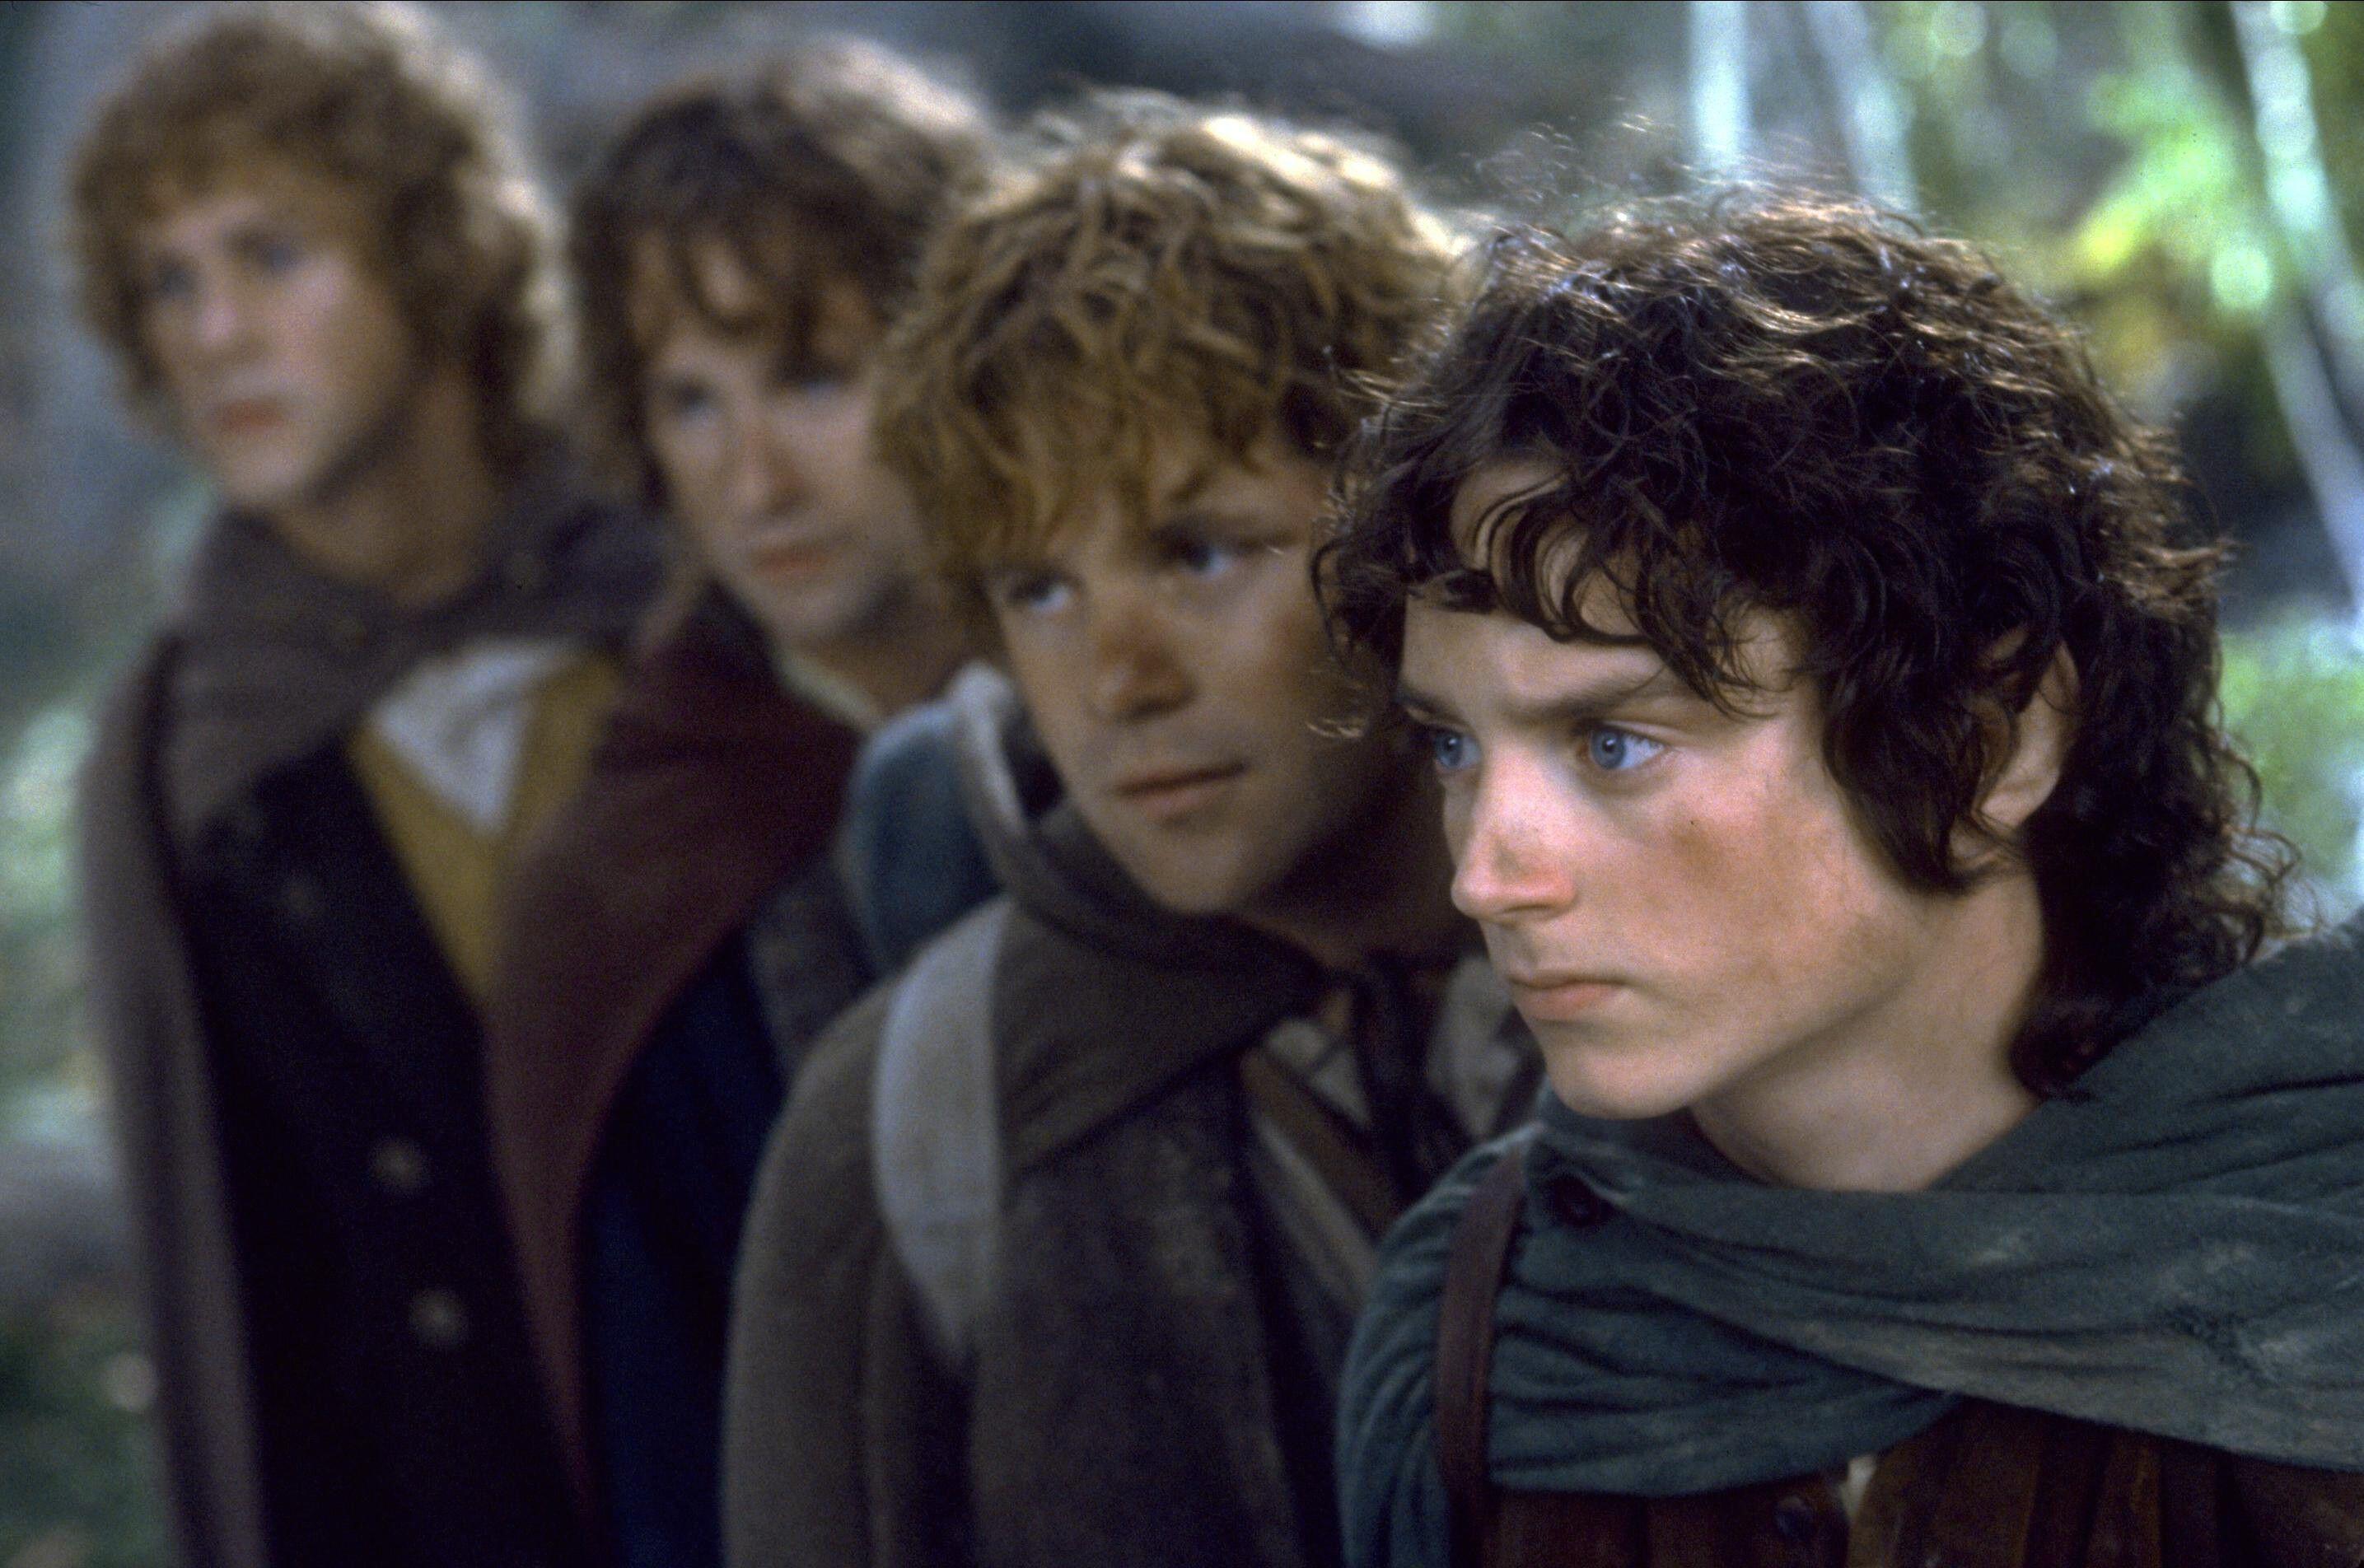 Top 10 Lord of the Rings Heroes from Peter Jackson's Movies Ranked